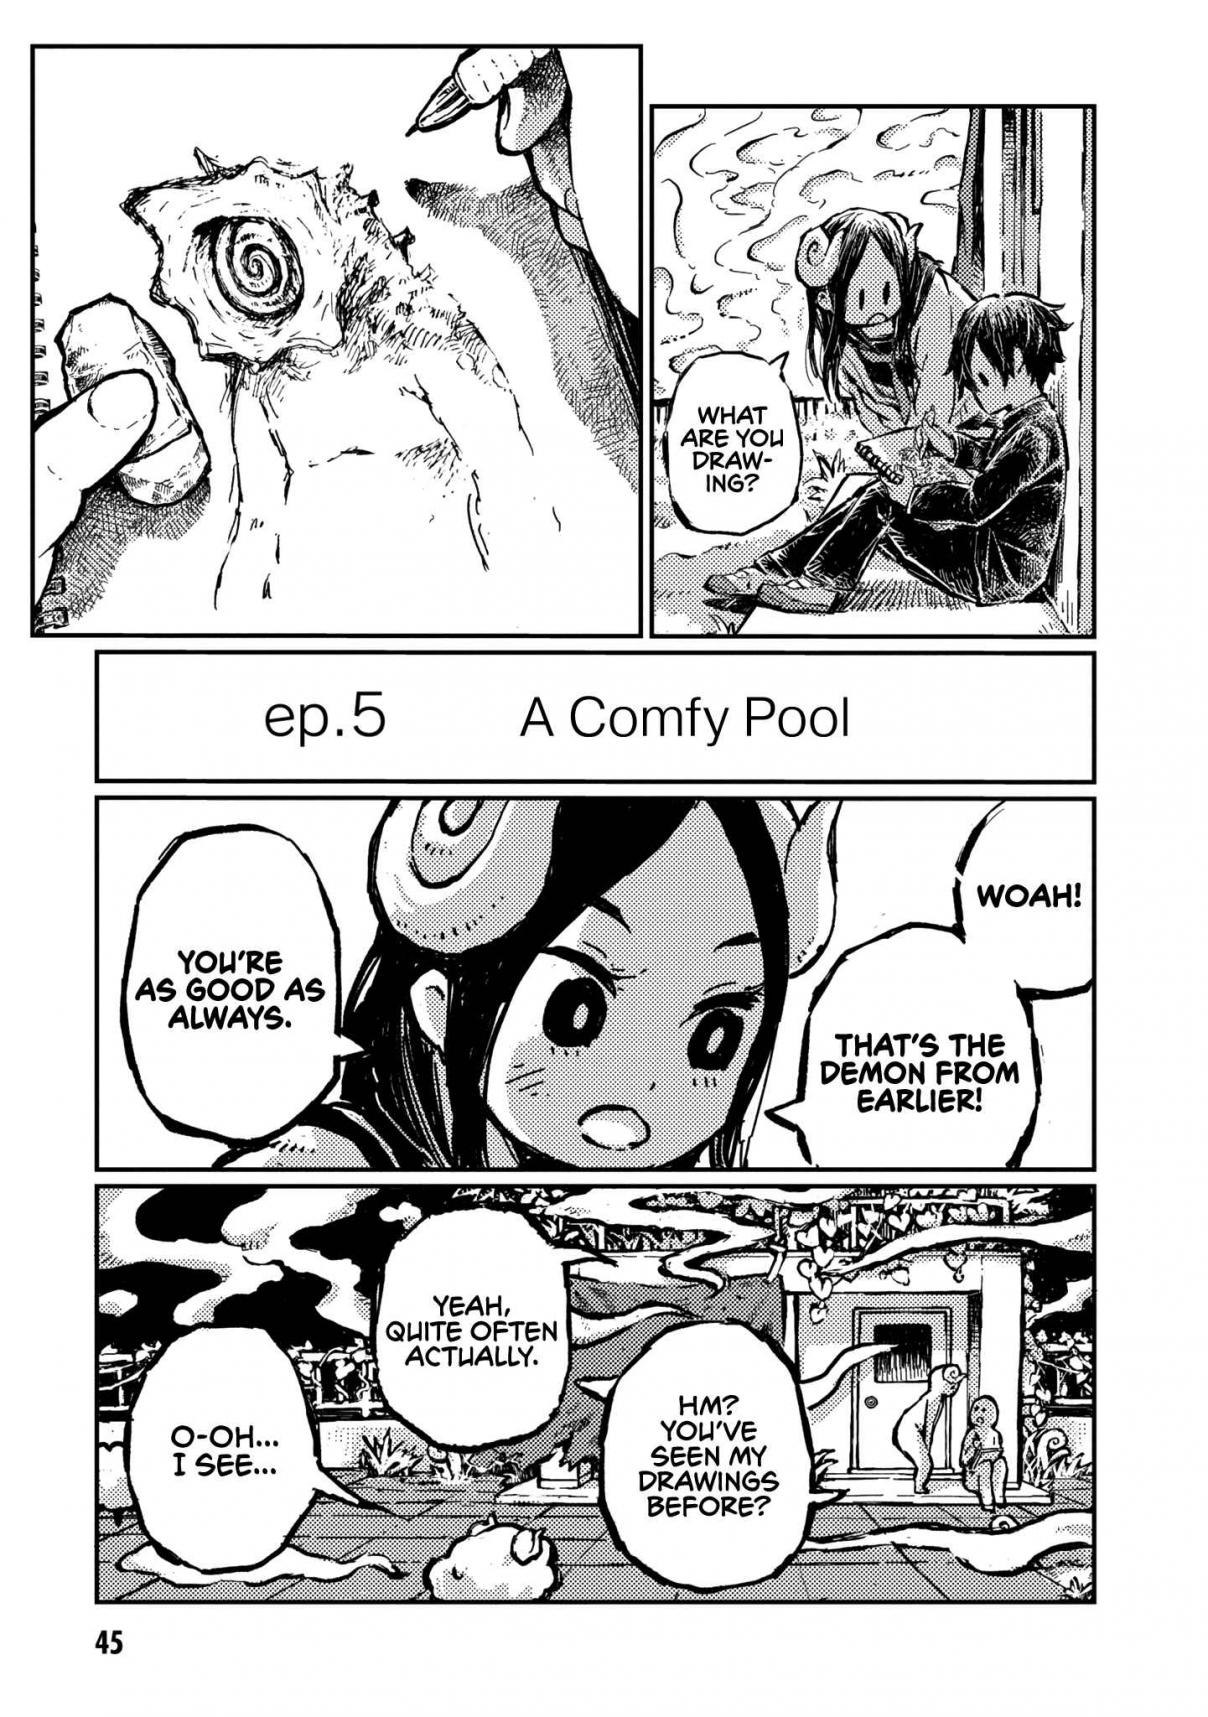 Sheeply Horned Witch Romi Vol. 1 Ch. 5 A Comfy Pool